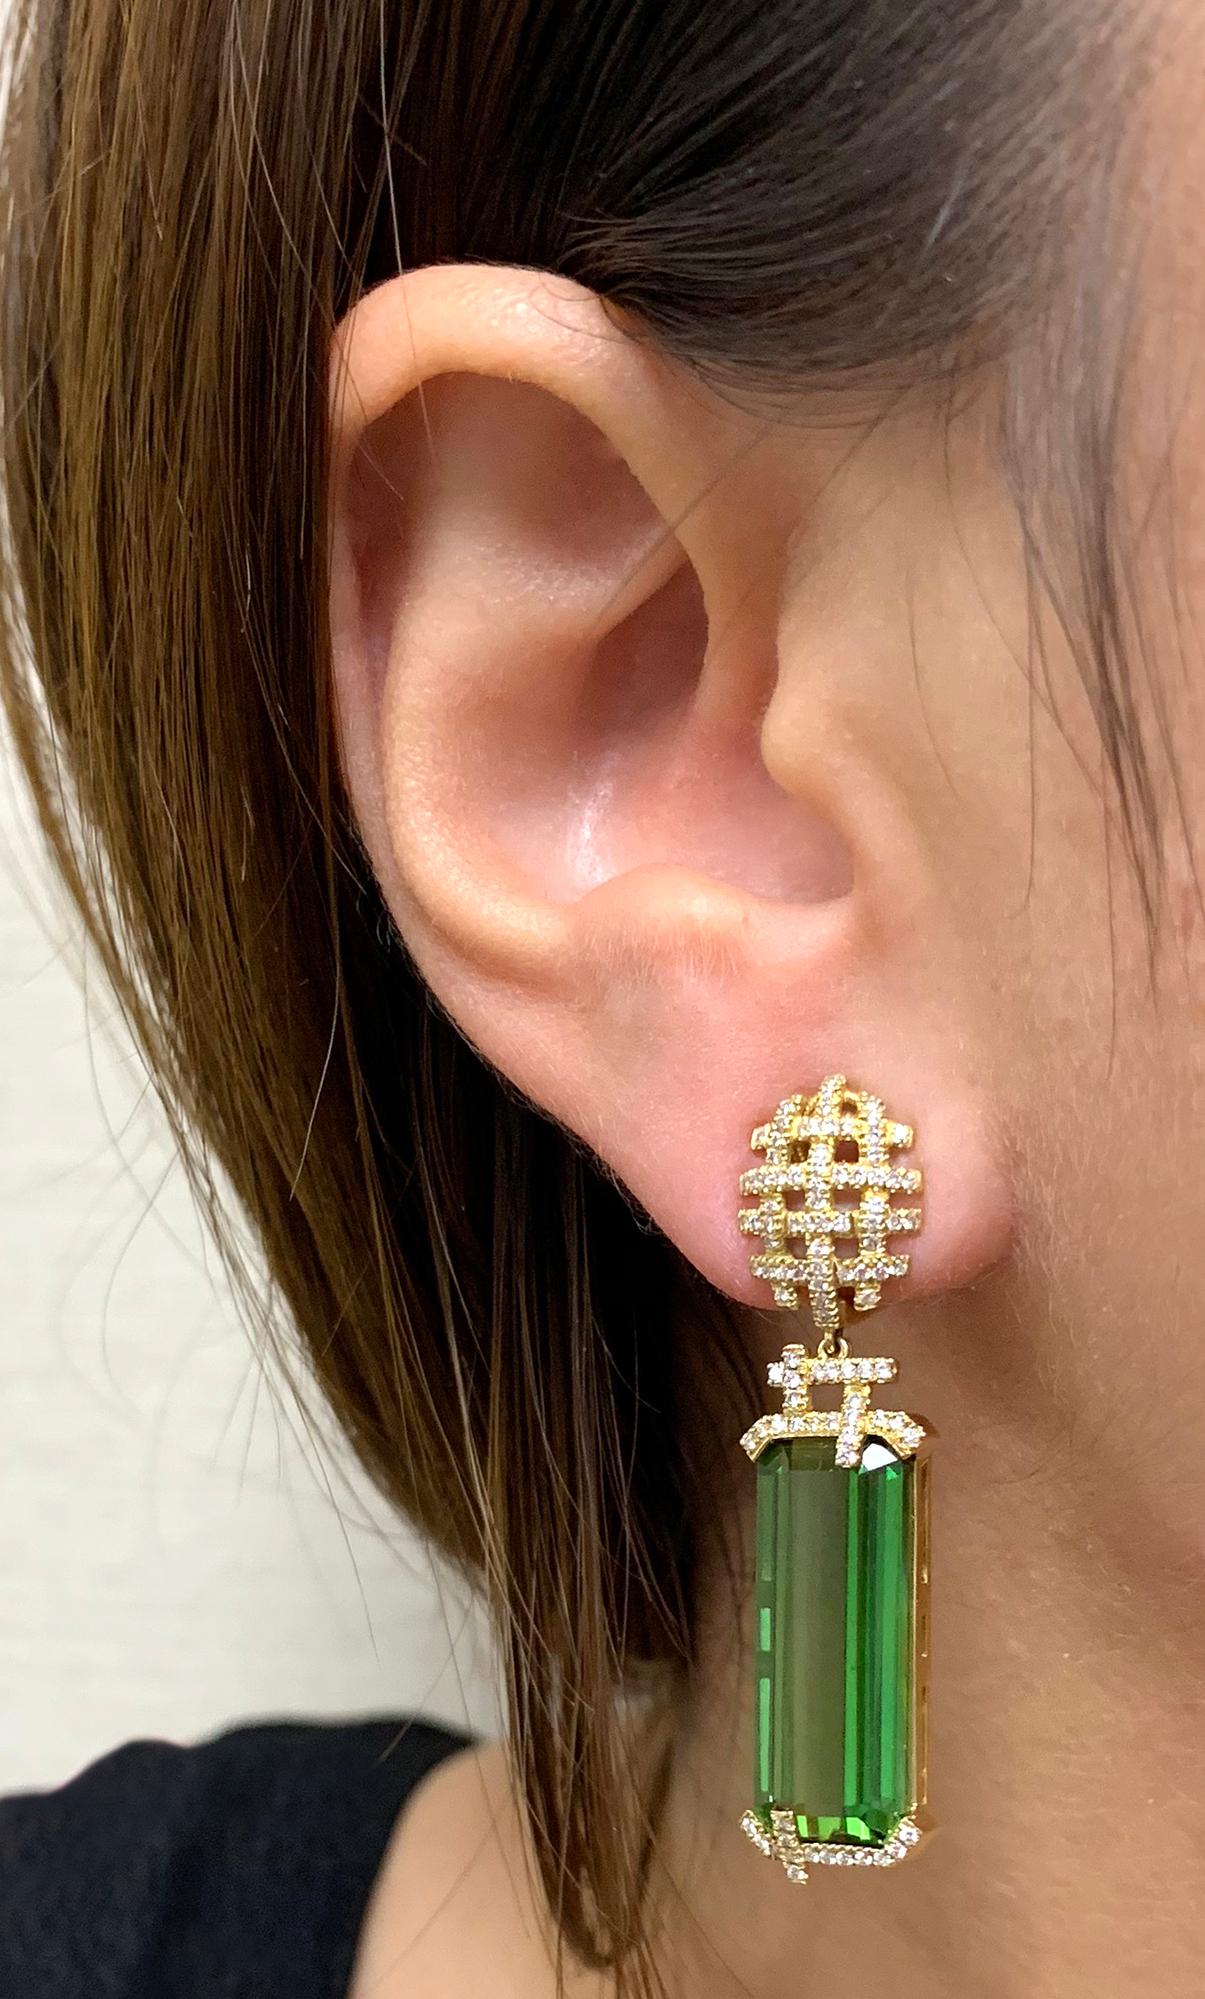 Green Tourmaline Emerald Cut Earrings with Diamonds Set Pave Earrings with Omega Clip in 18K Yellow Gold, from 'G-One' Collection. Our G-One Collection undeniably carries the most special pieces of Goshwara. The sought-after, one-of-a-kind pieces